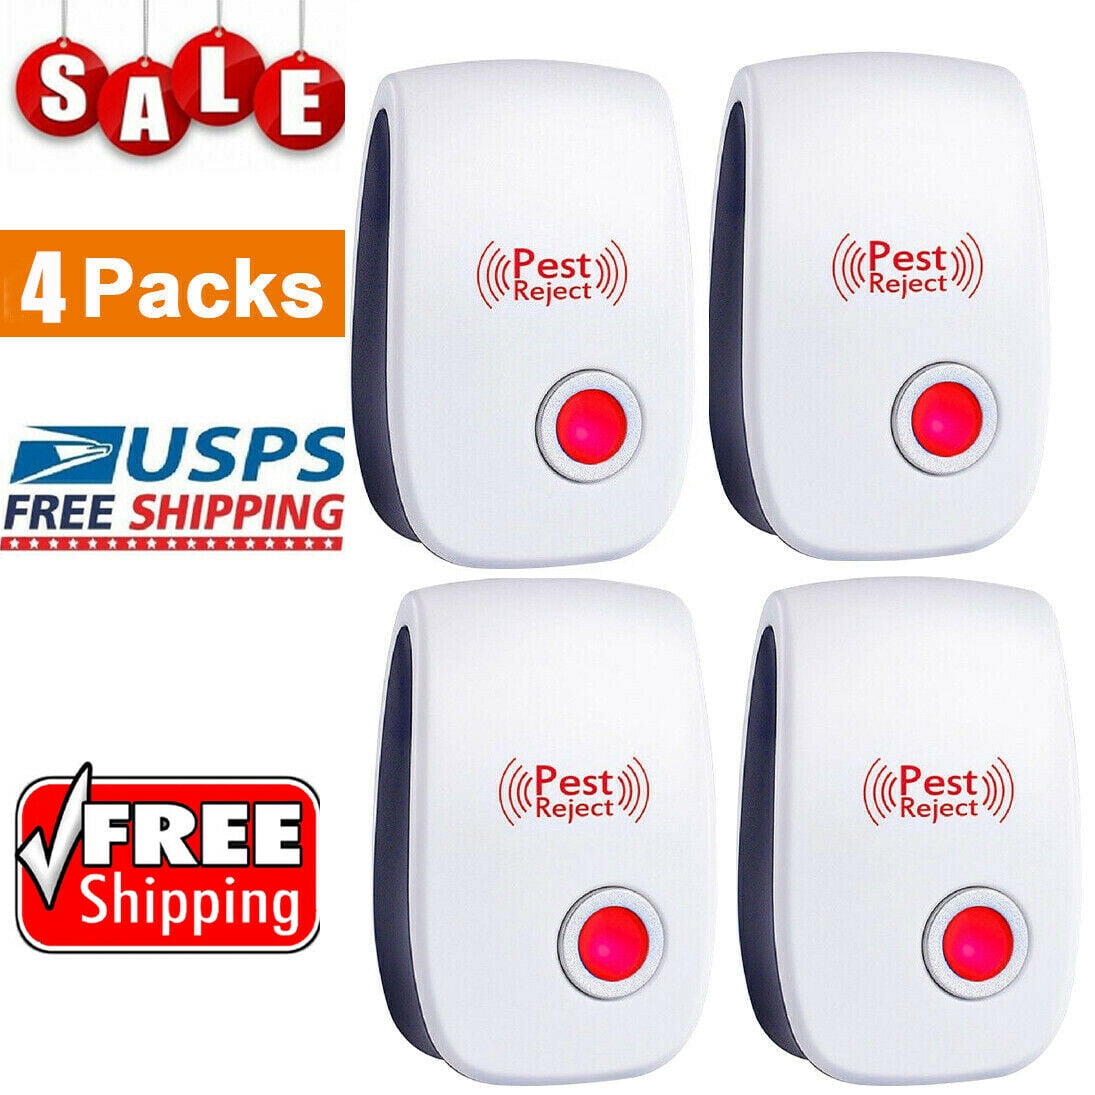 Ultrasonic Pest Reject Bug Mosquito Rat Mouse Killer Electronic Repeller Control 